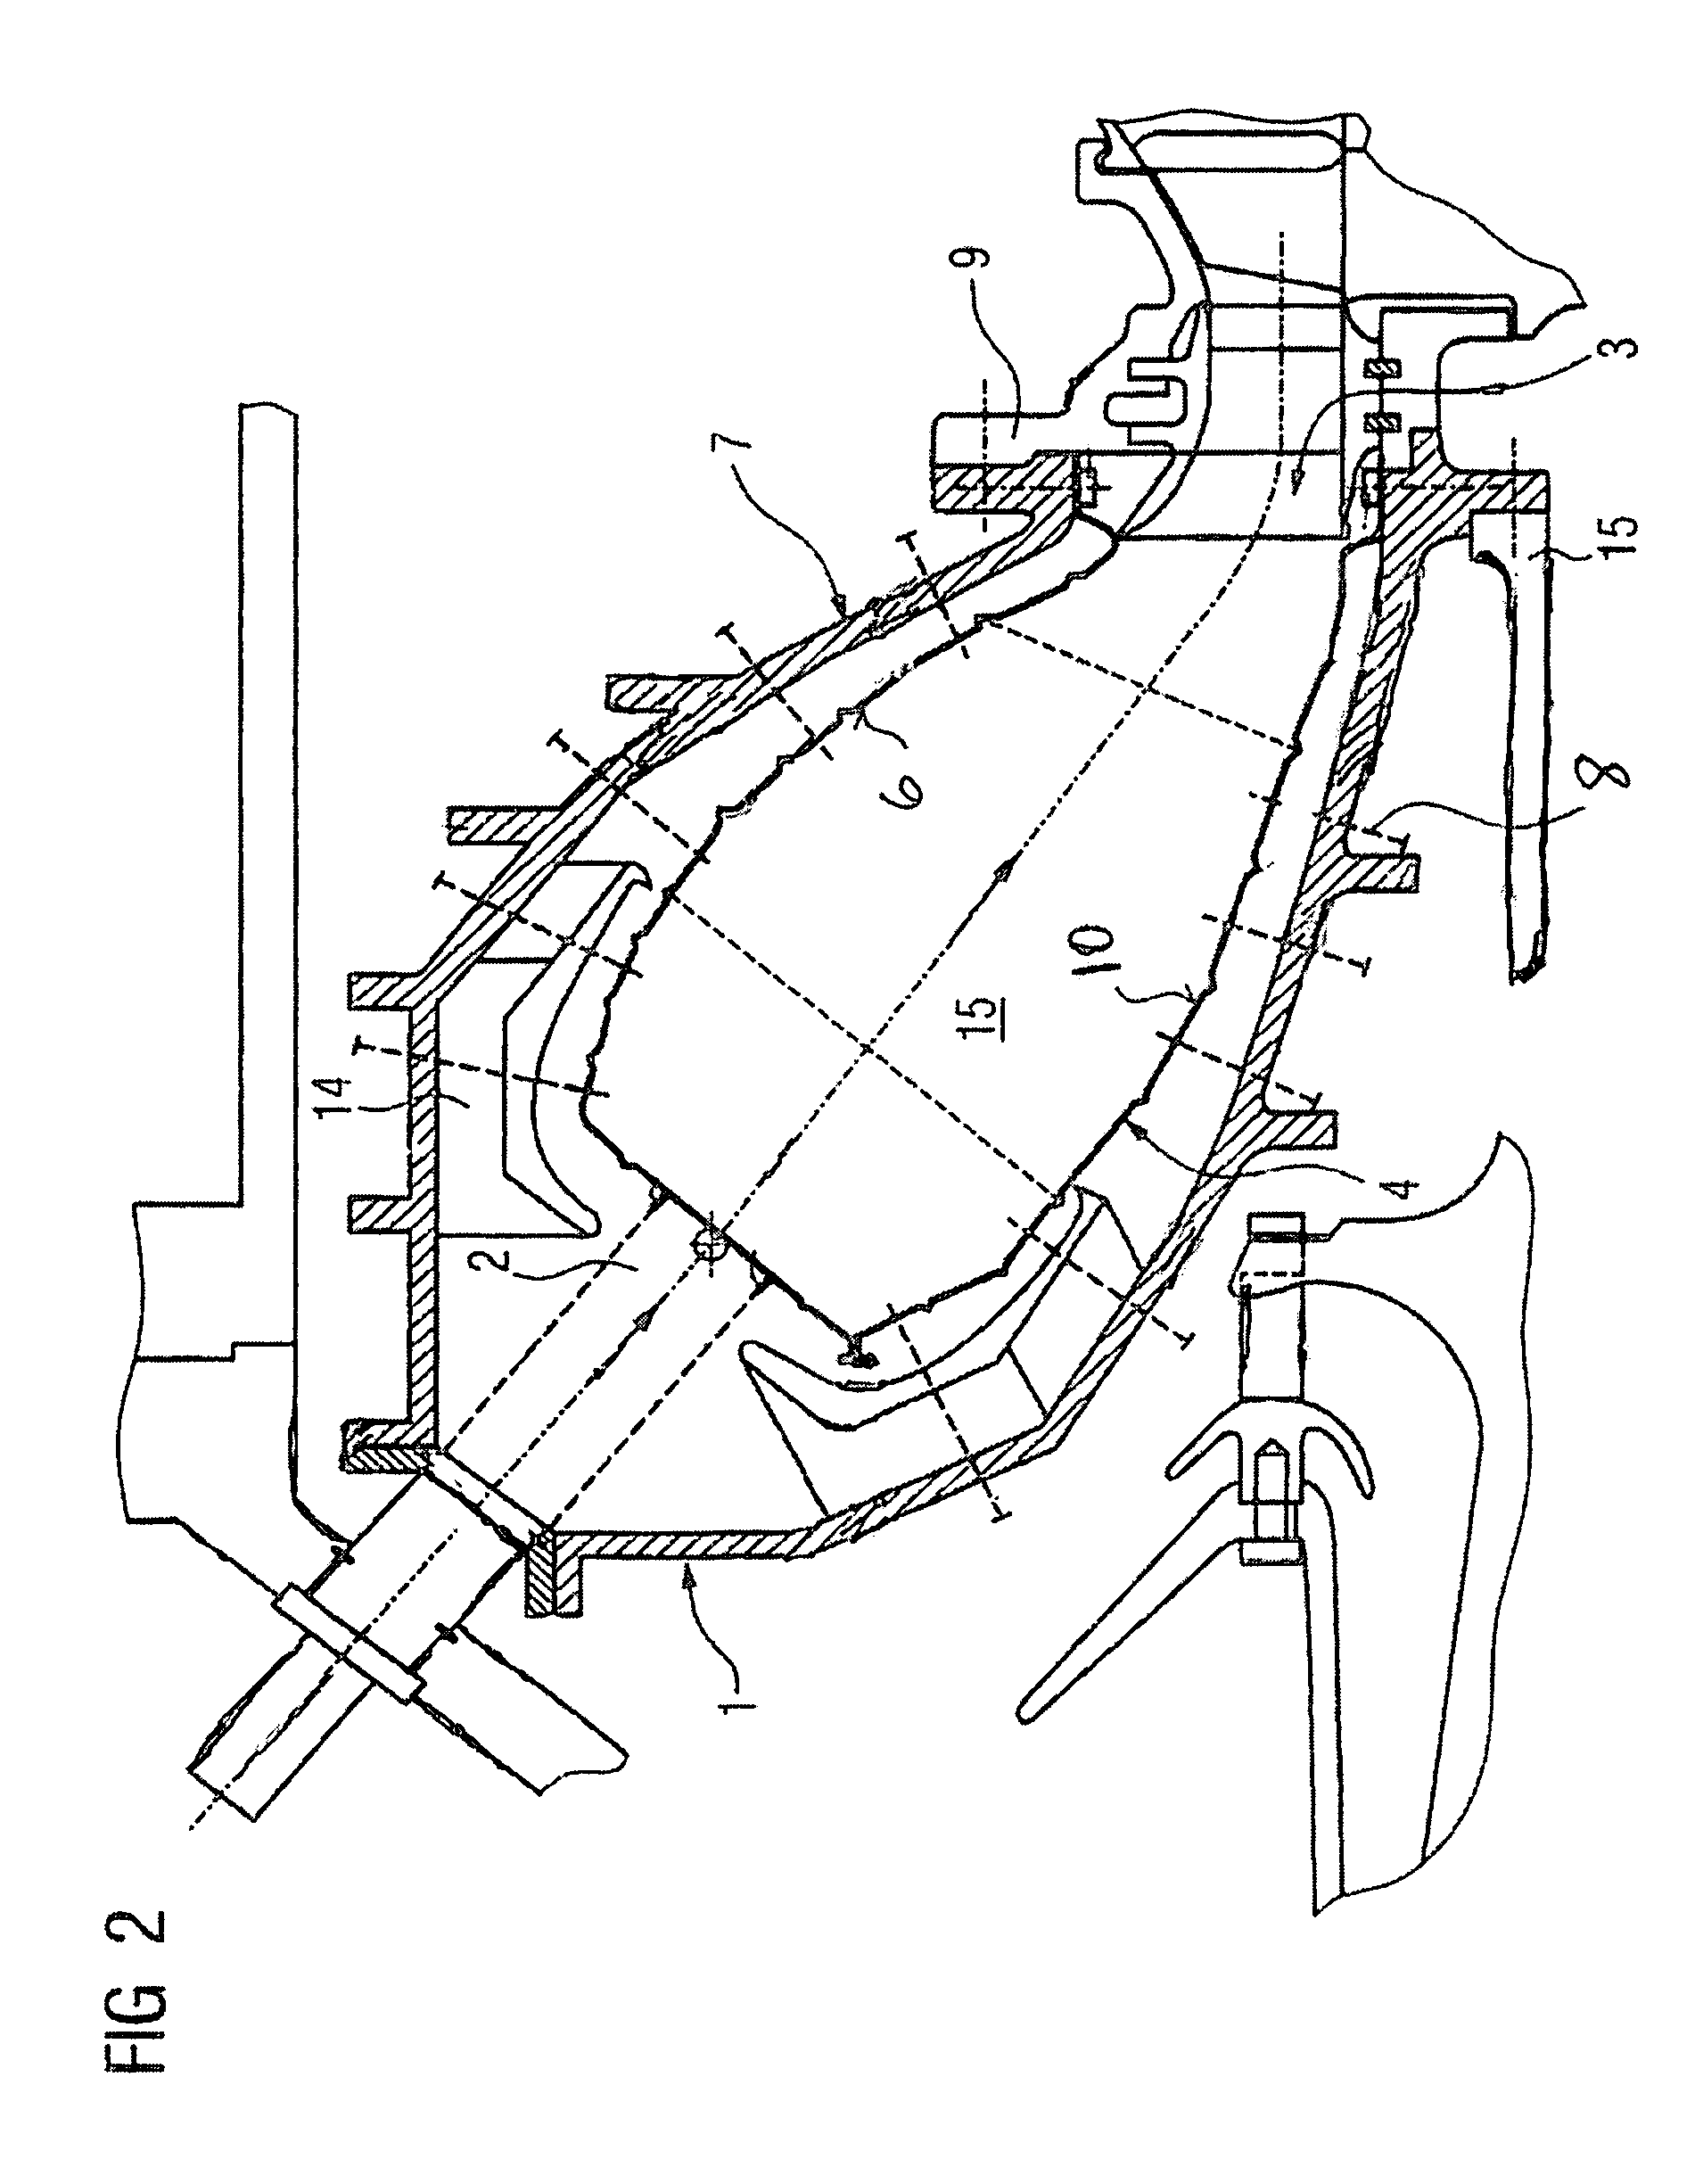 Combustion chamber for combusting a combustible fluid mixture